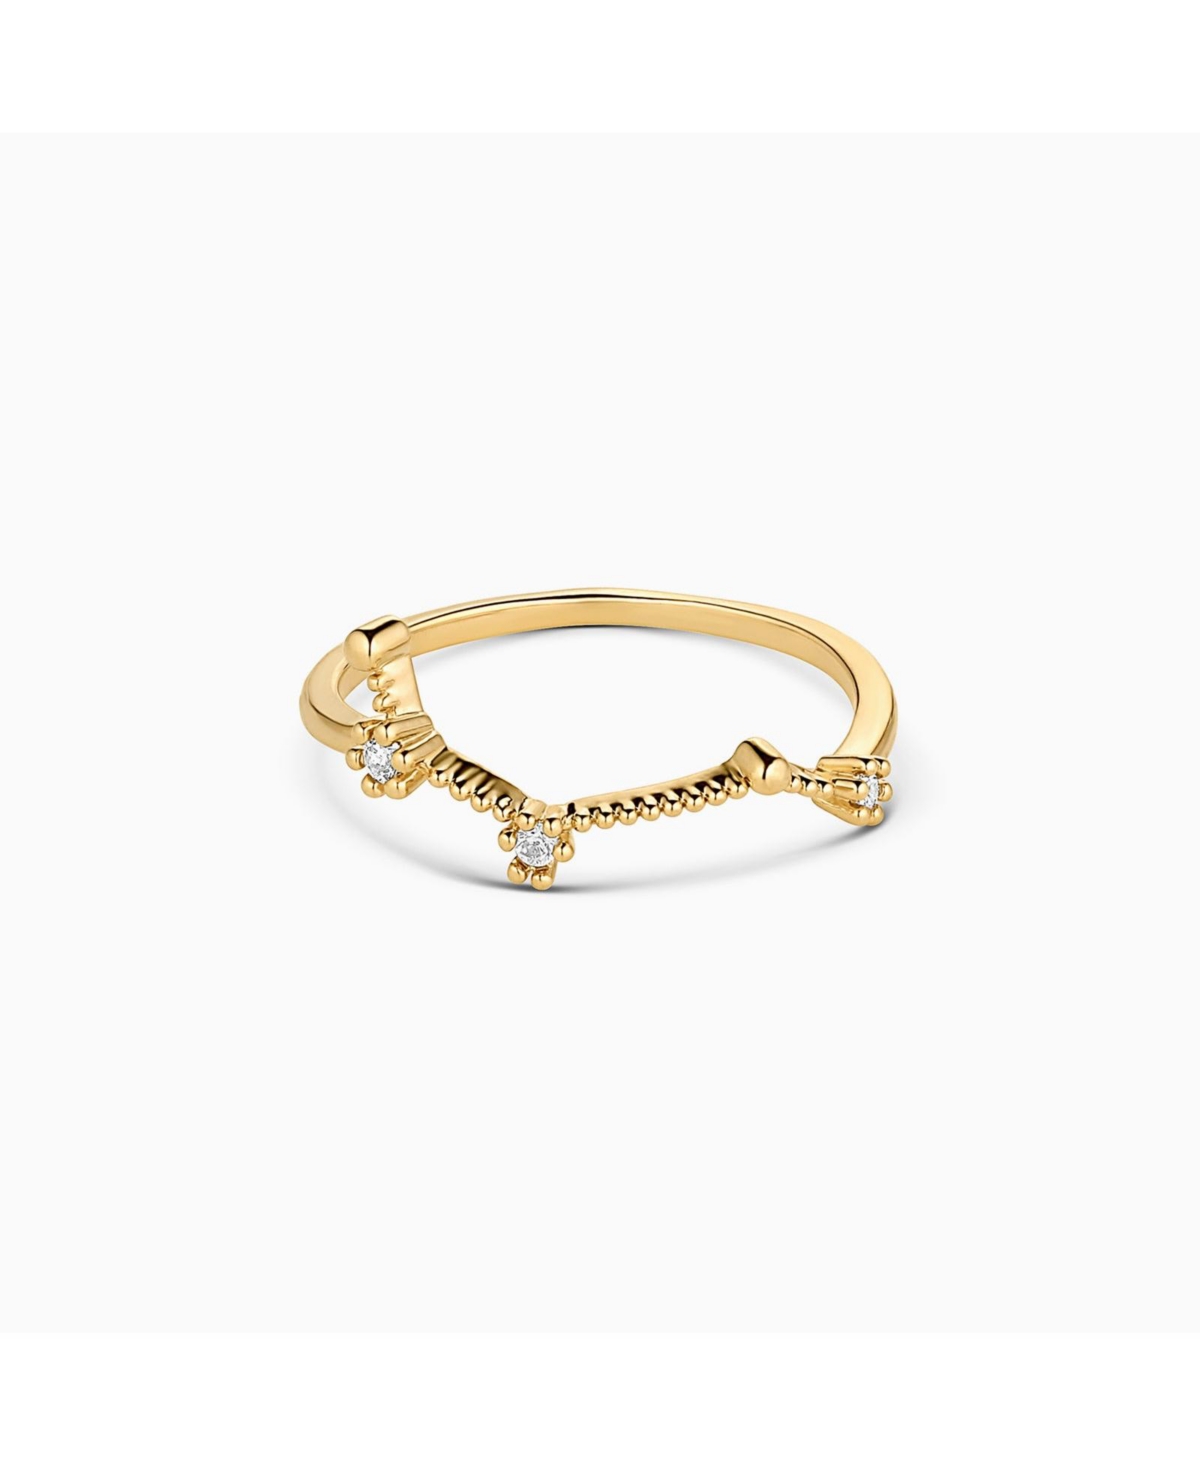 Constellation Zodiac Ring - Aries - Gold - Gold - aries